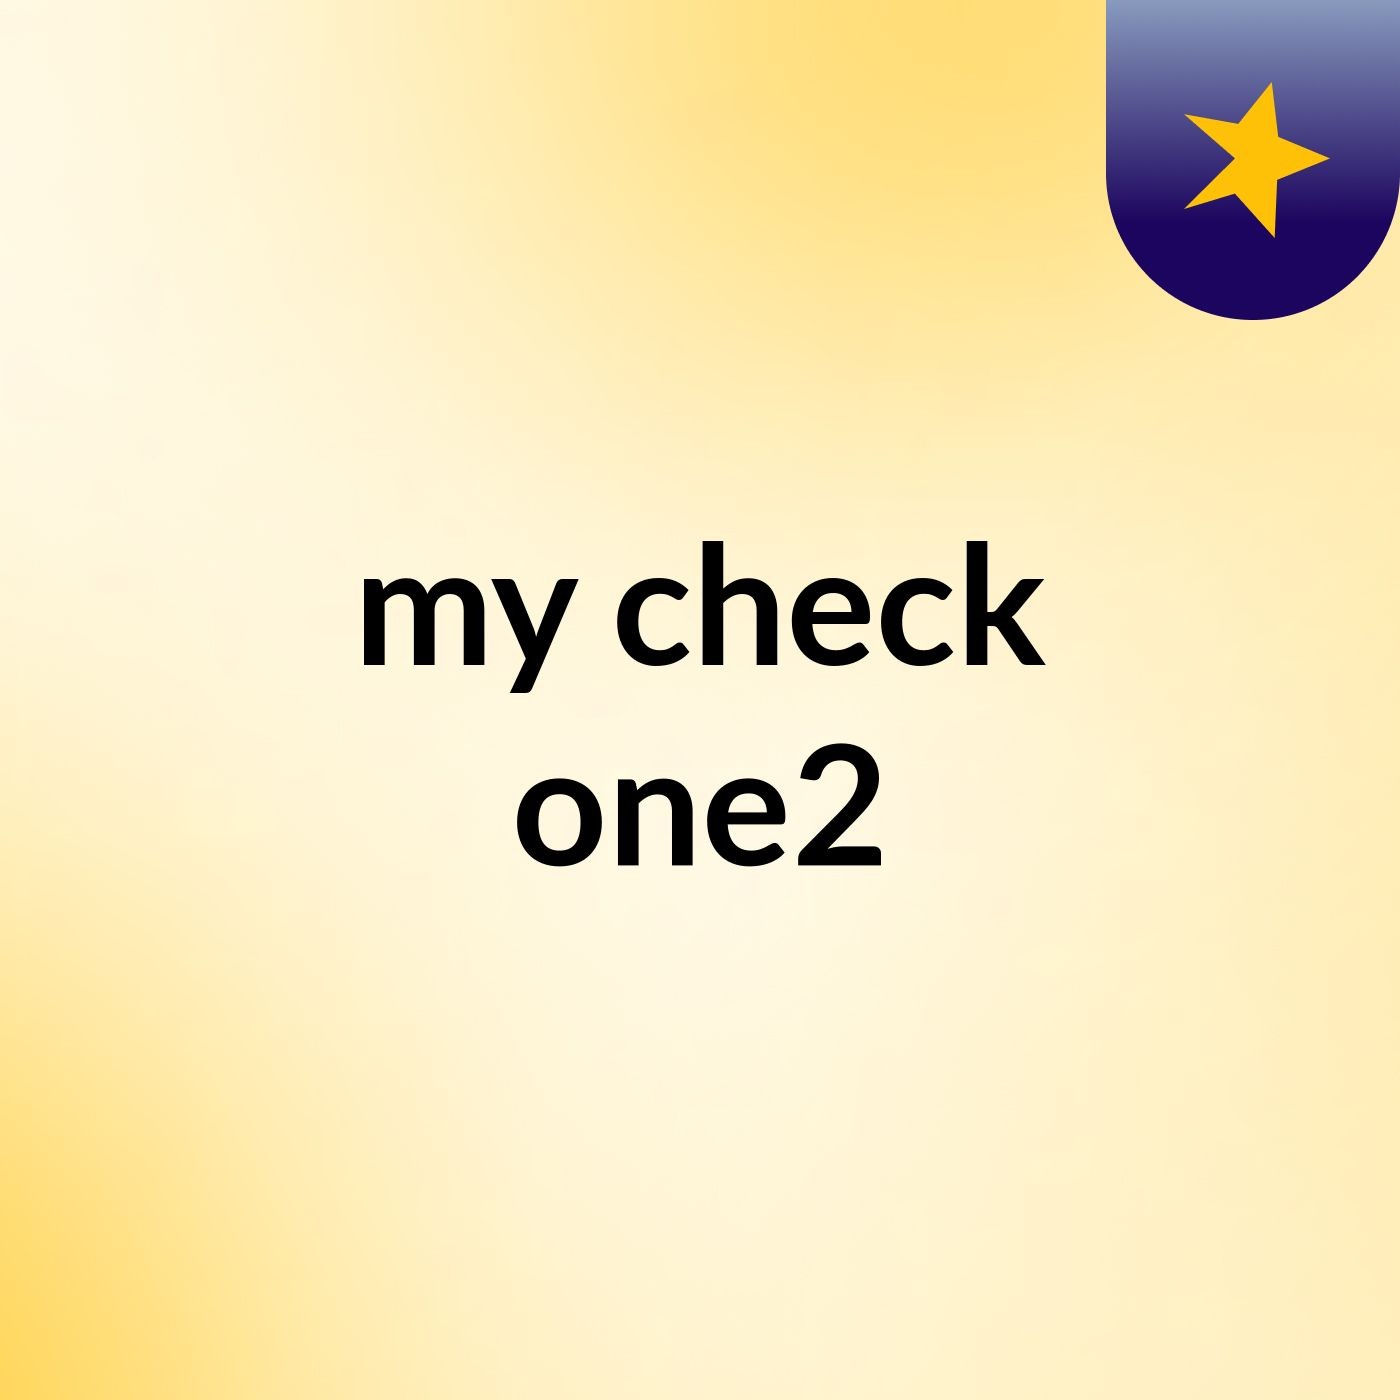 my check one2